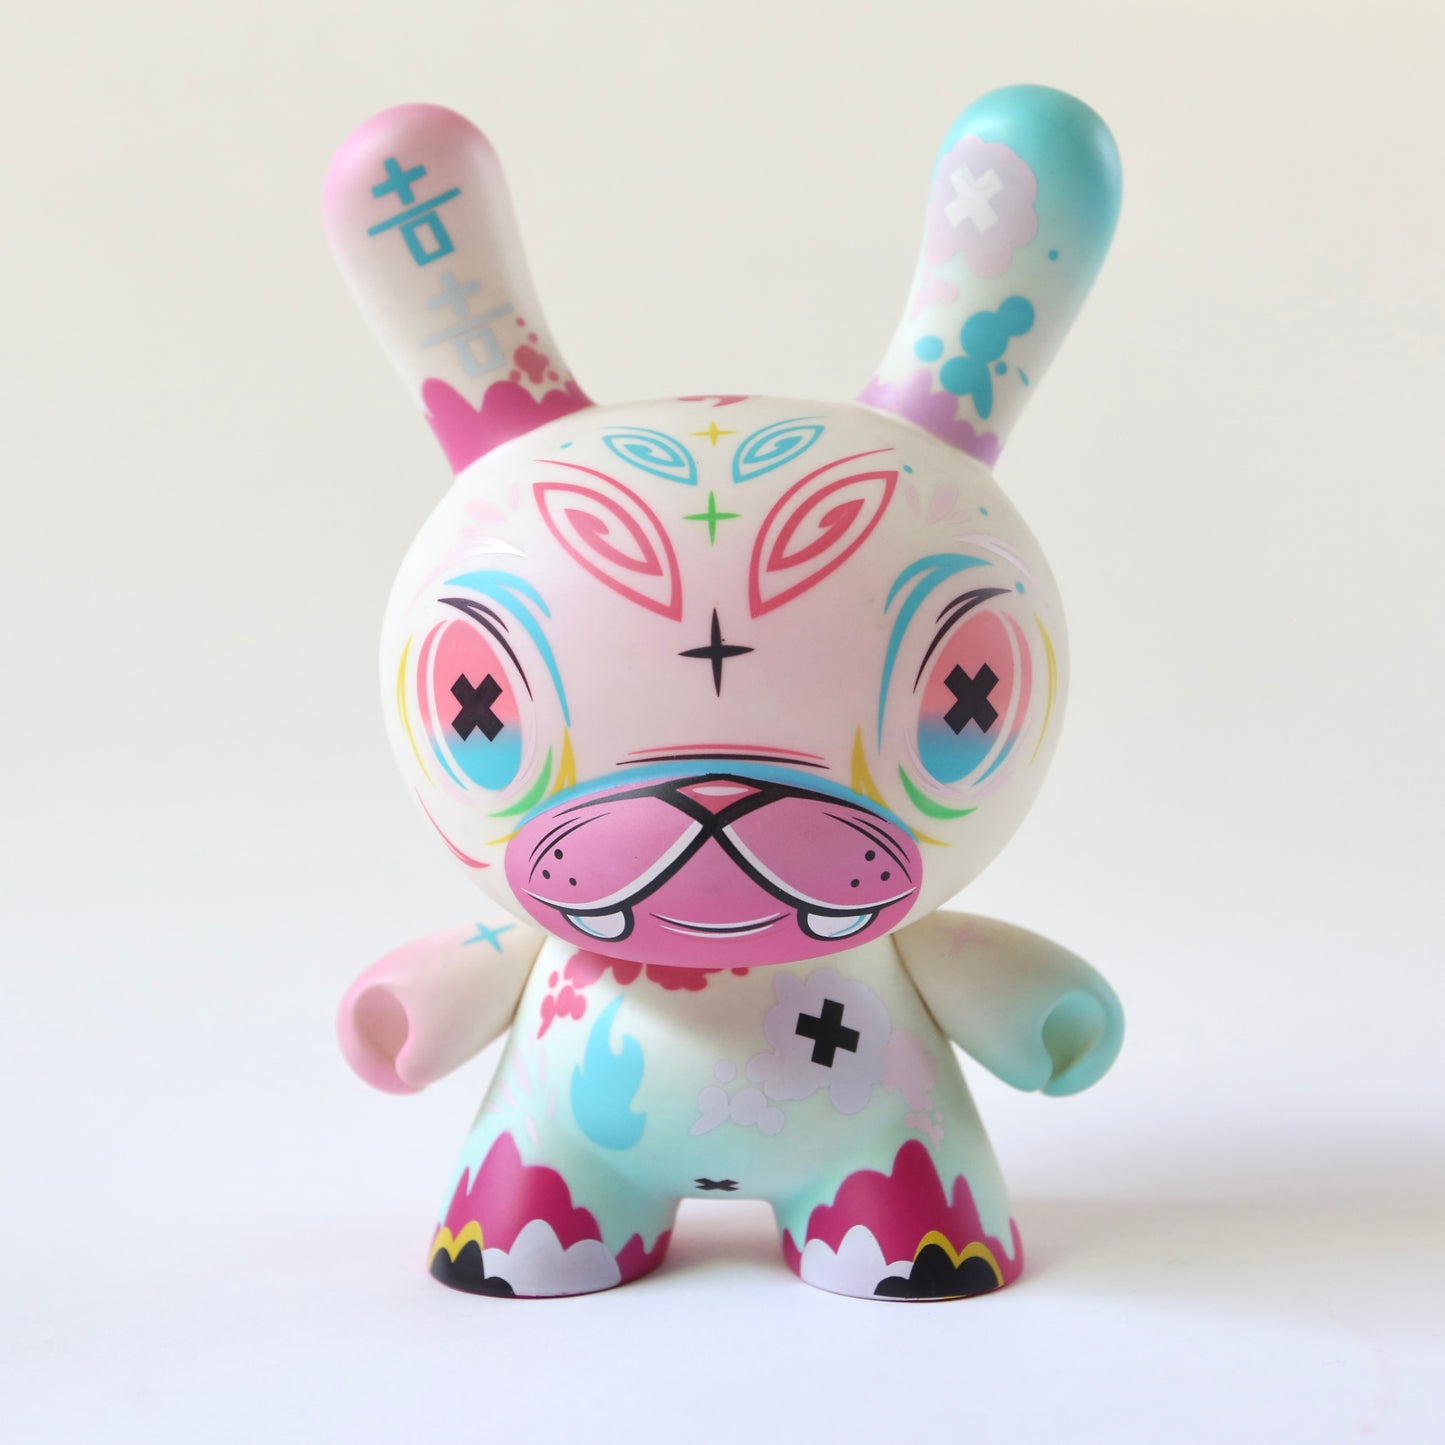 "Painkiller" 8in Dunny by Thomas Han x Kidrobot